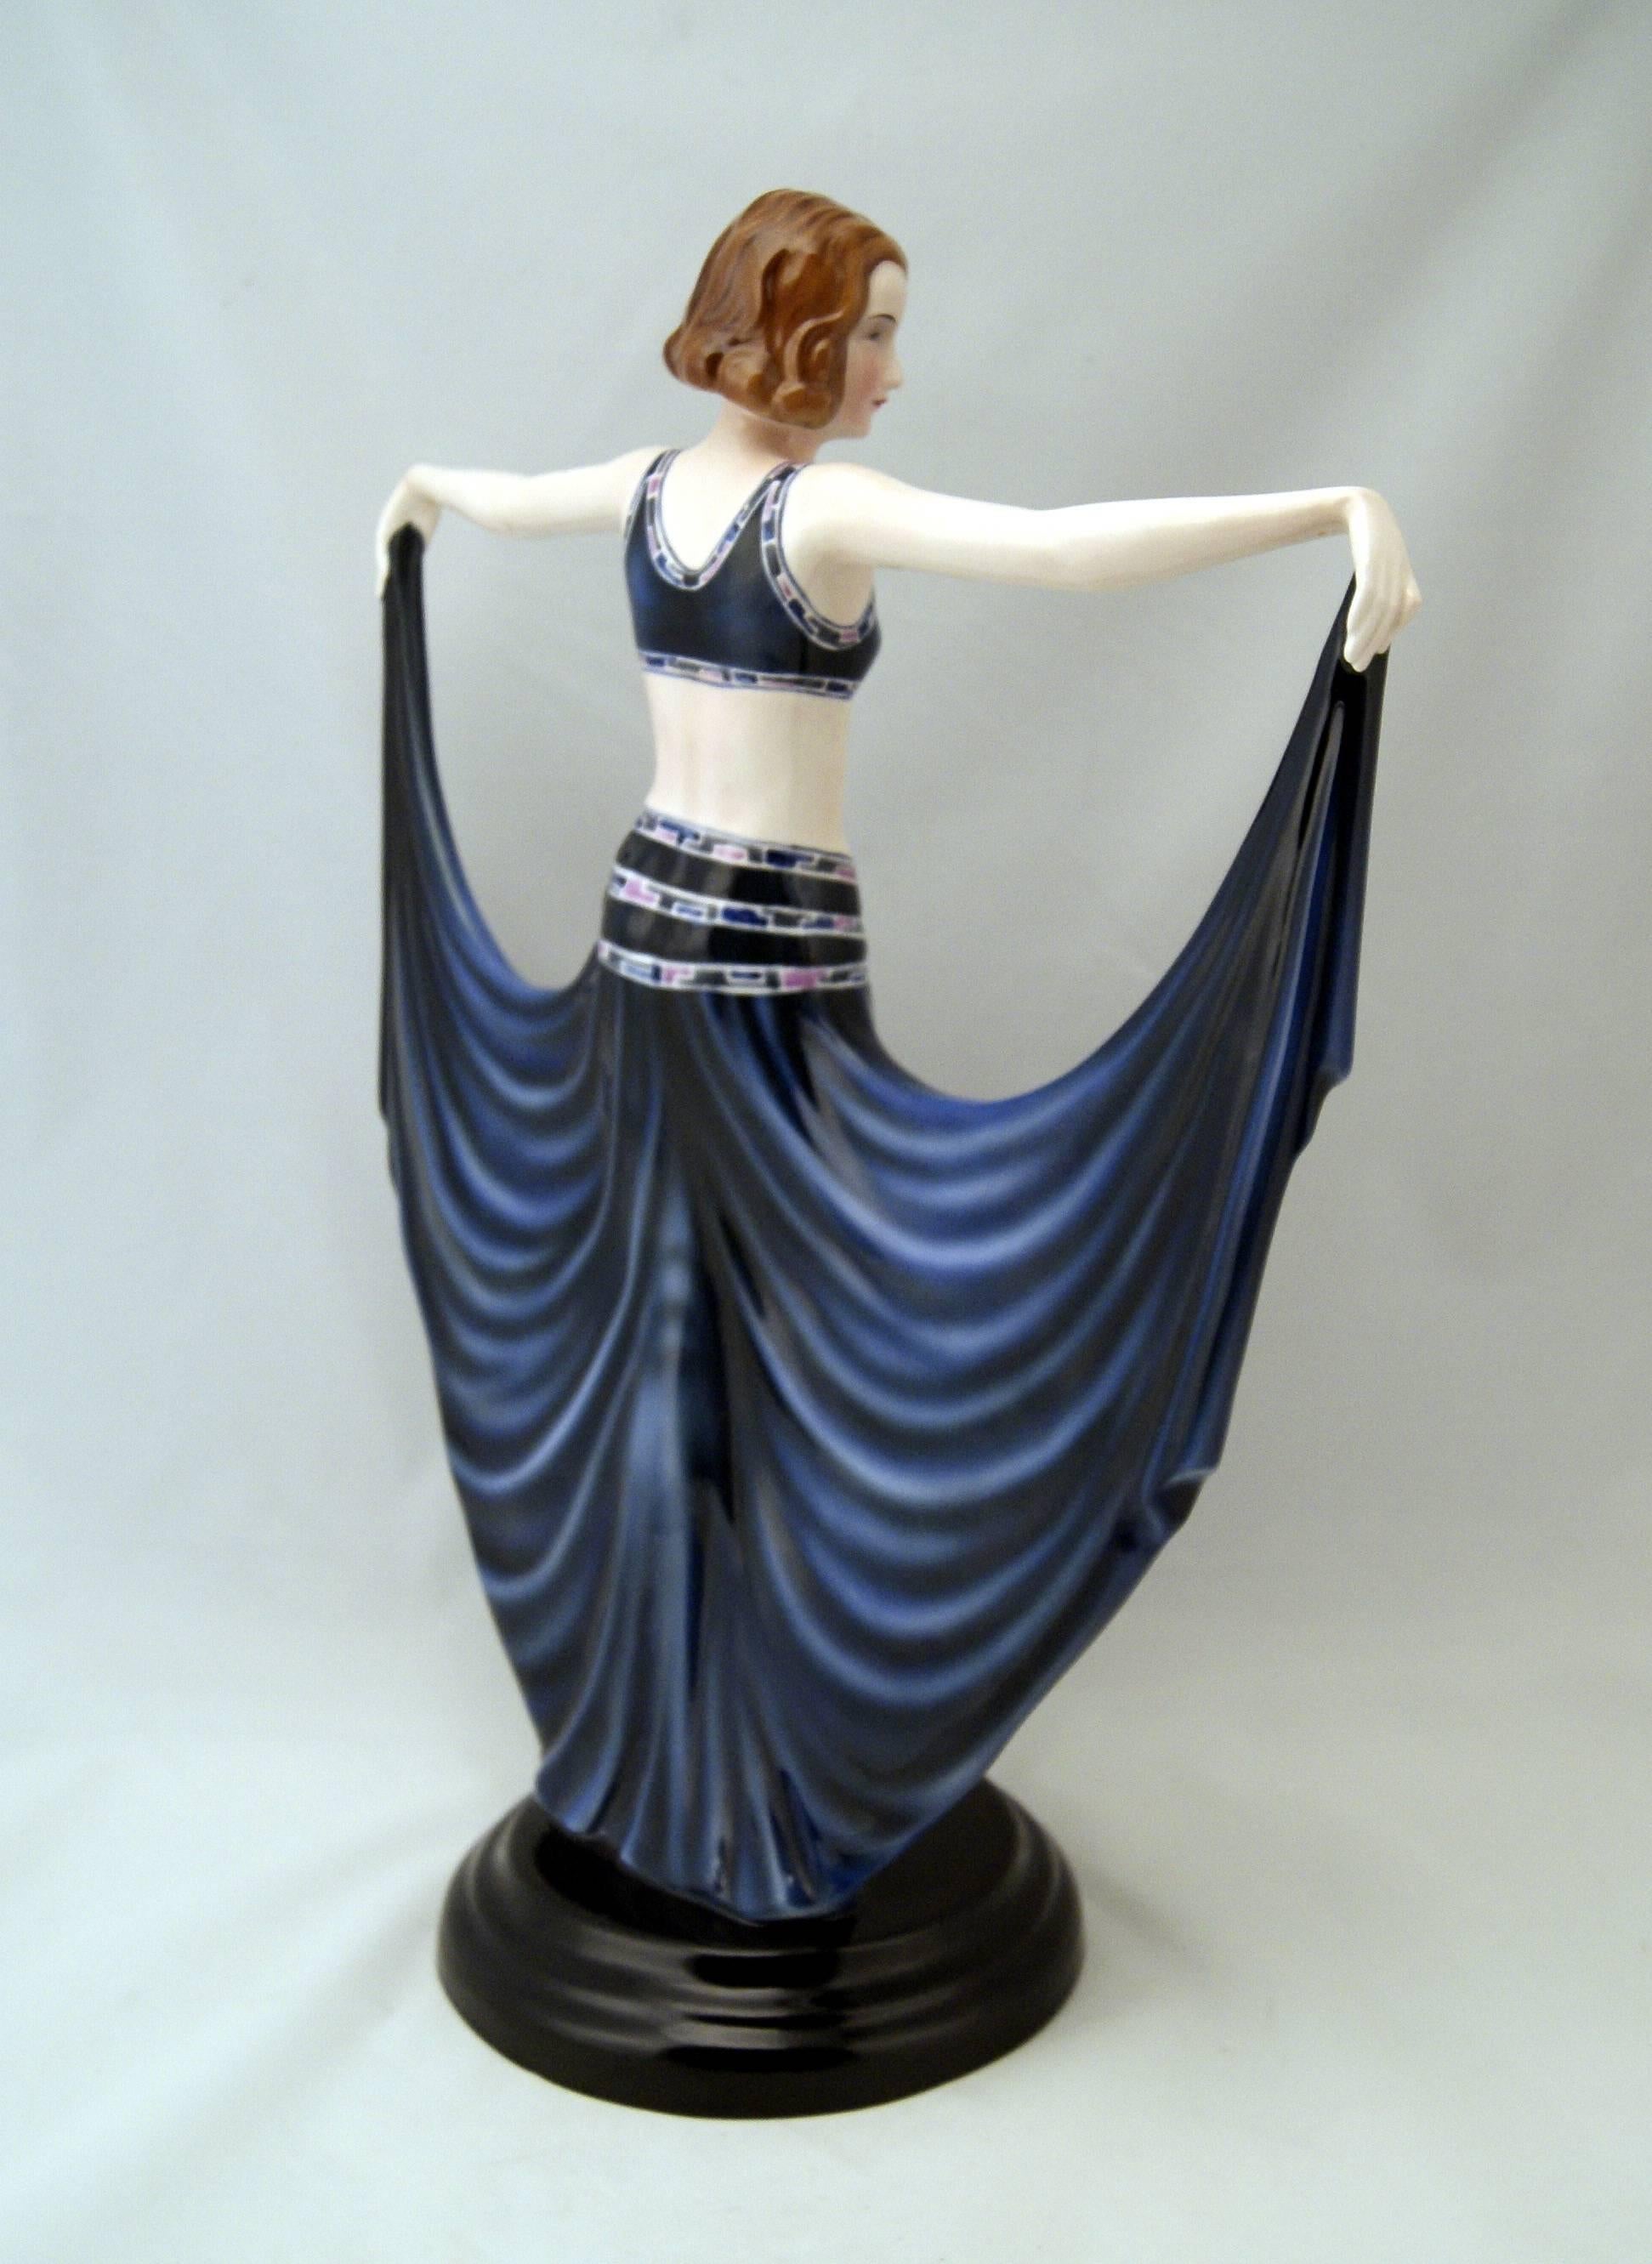 Goldscheider Vienna tall posed lady dancer wearing blue long skirt.

Designed by Josef Lorenzl (1892 - 1950) / one of the most important designers having been active for Goldscheider manufactory in period of 1920-1940 / Designed, circa